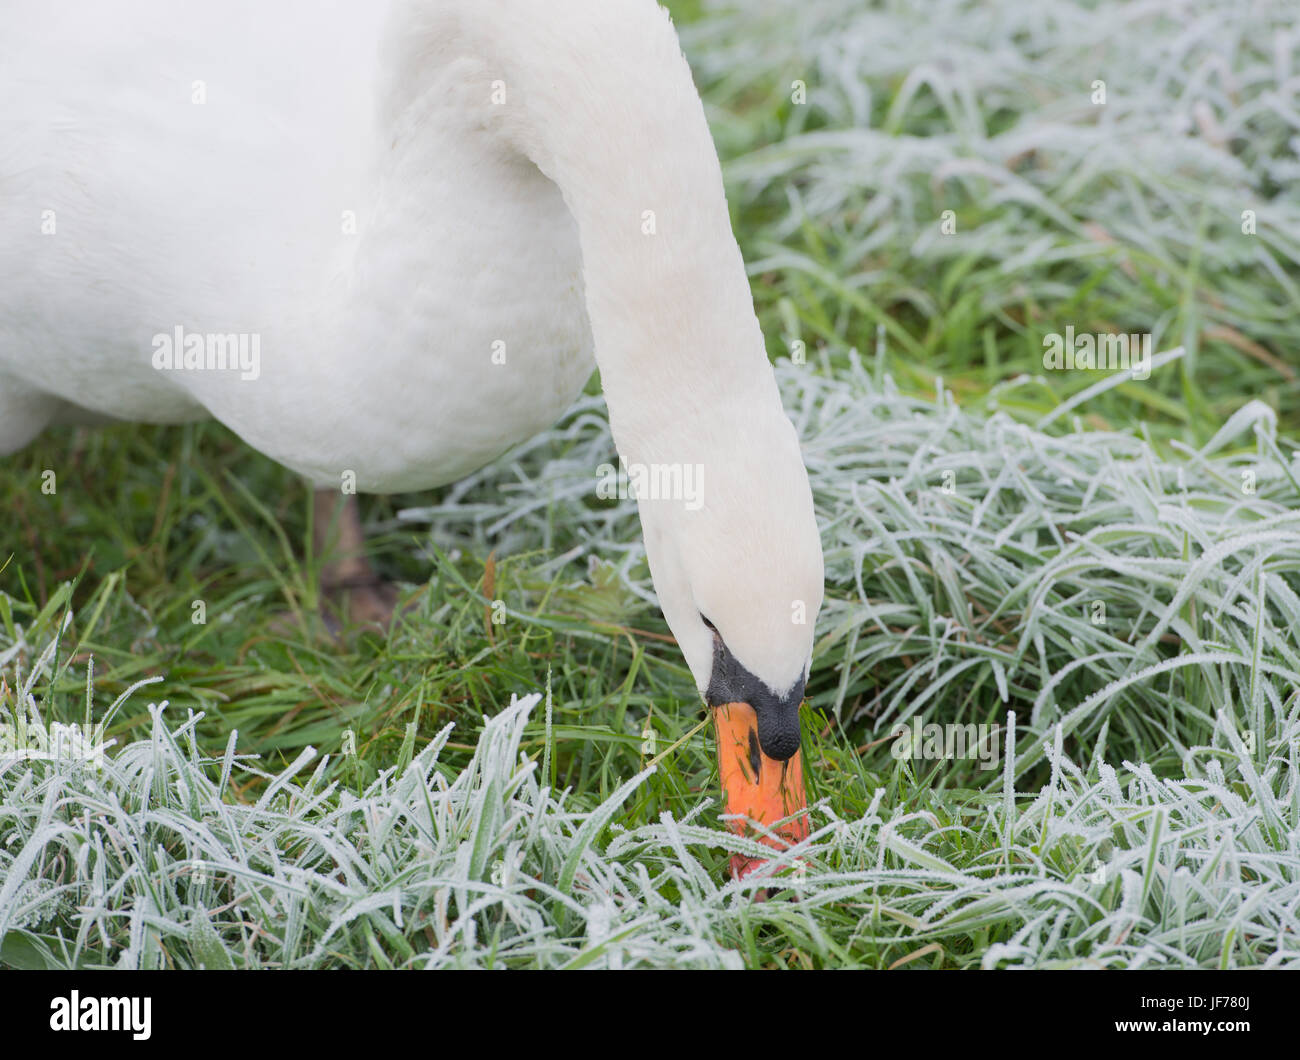 Swan eating grass on the meadow in winter Stock Photo